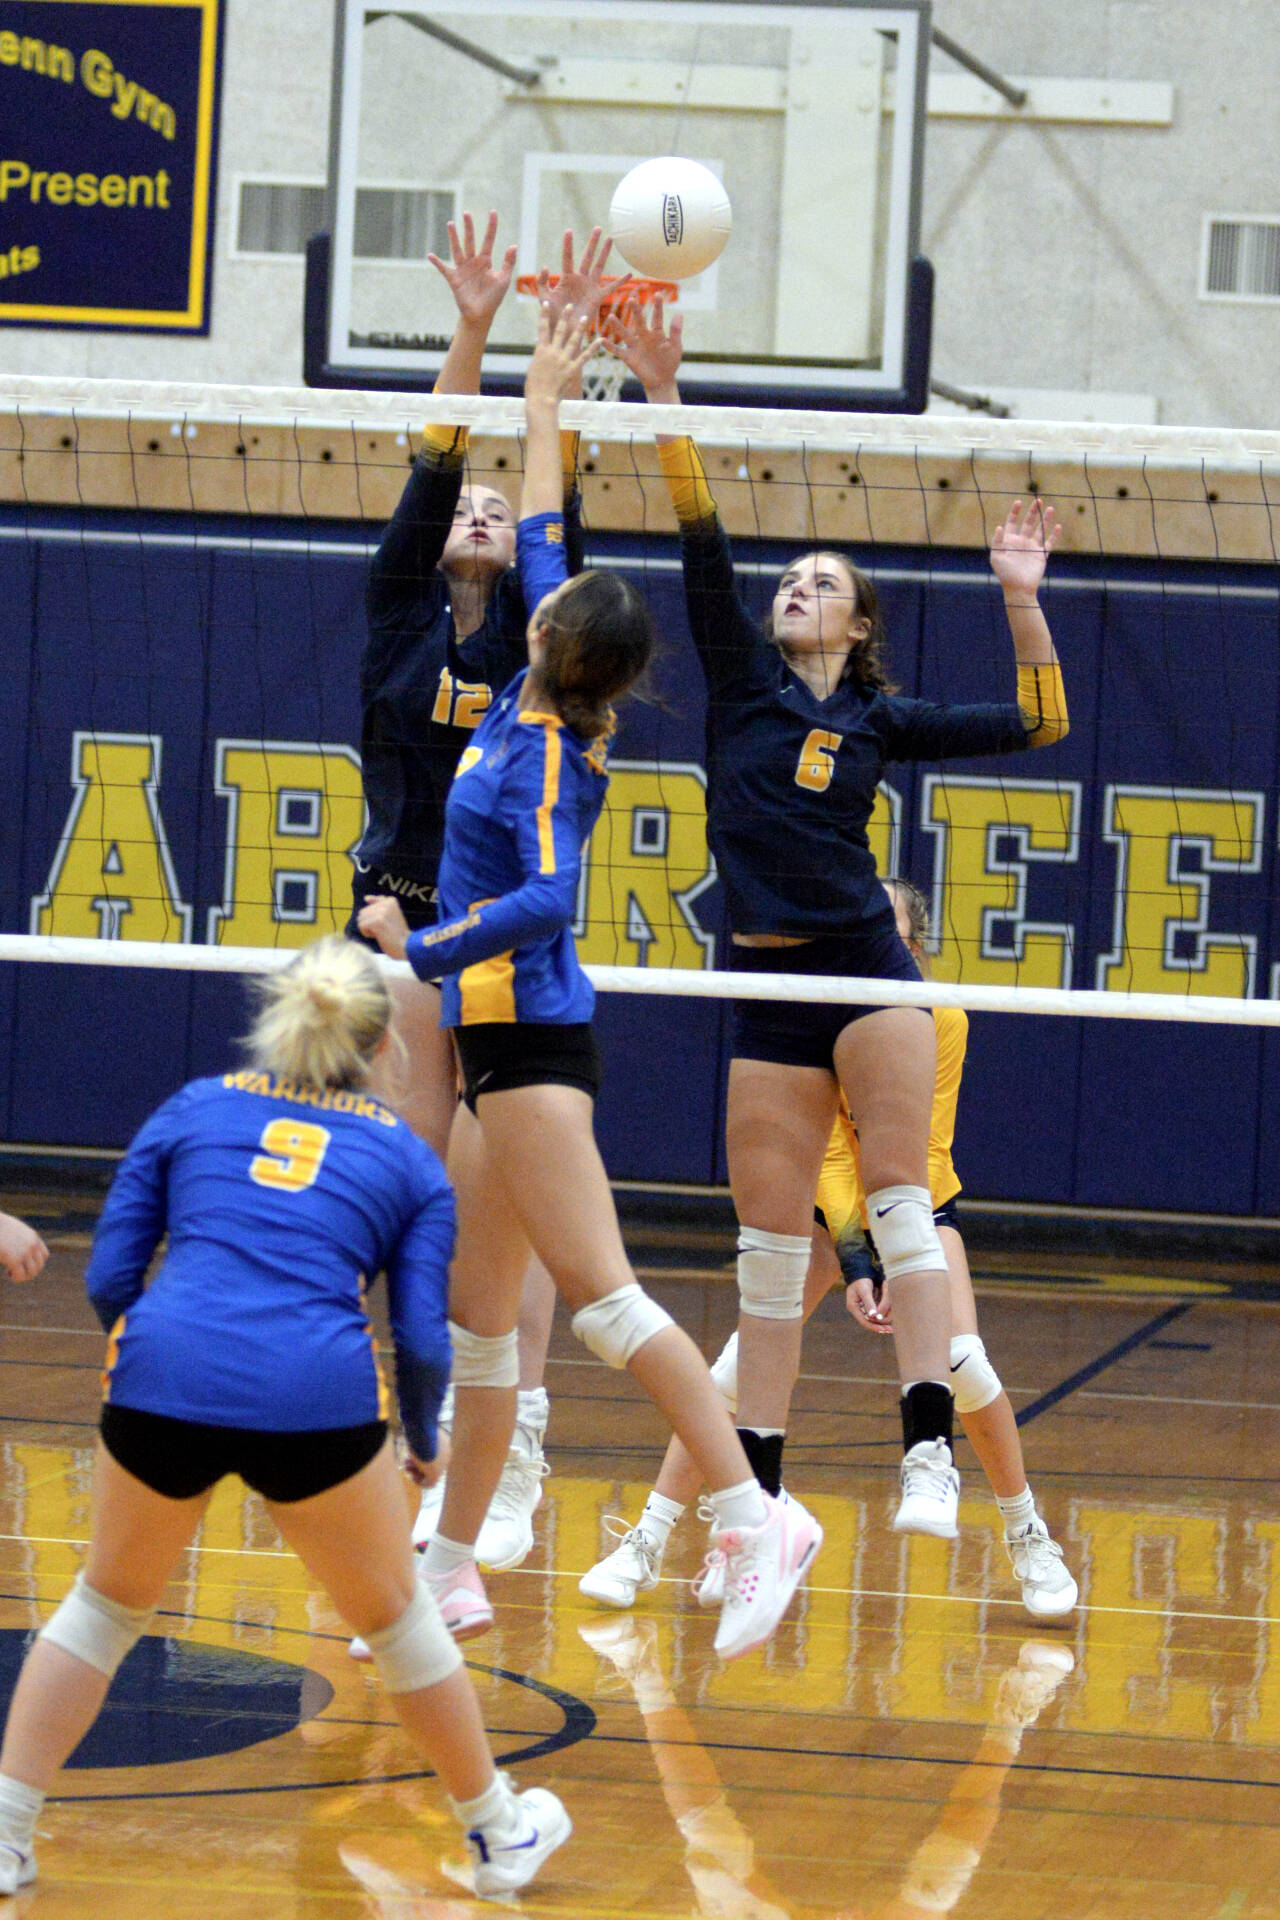 RYAN SPARKS | THE DAILY WORLD Aberdeen’s Lilly Camp (12) and Savannah Strickland (6) defend a shot by Rochester’s Taylor Koehn during the Bobcats’ straight-set victory on Thursday at Sam Benn Gym in Aberdeen.